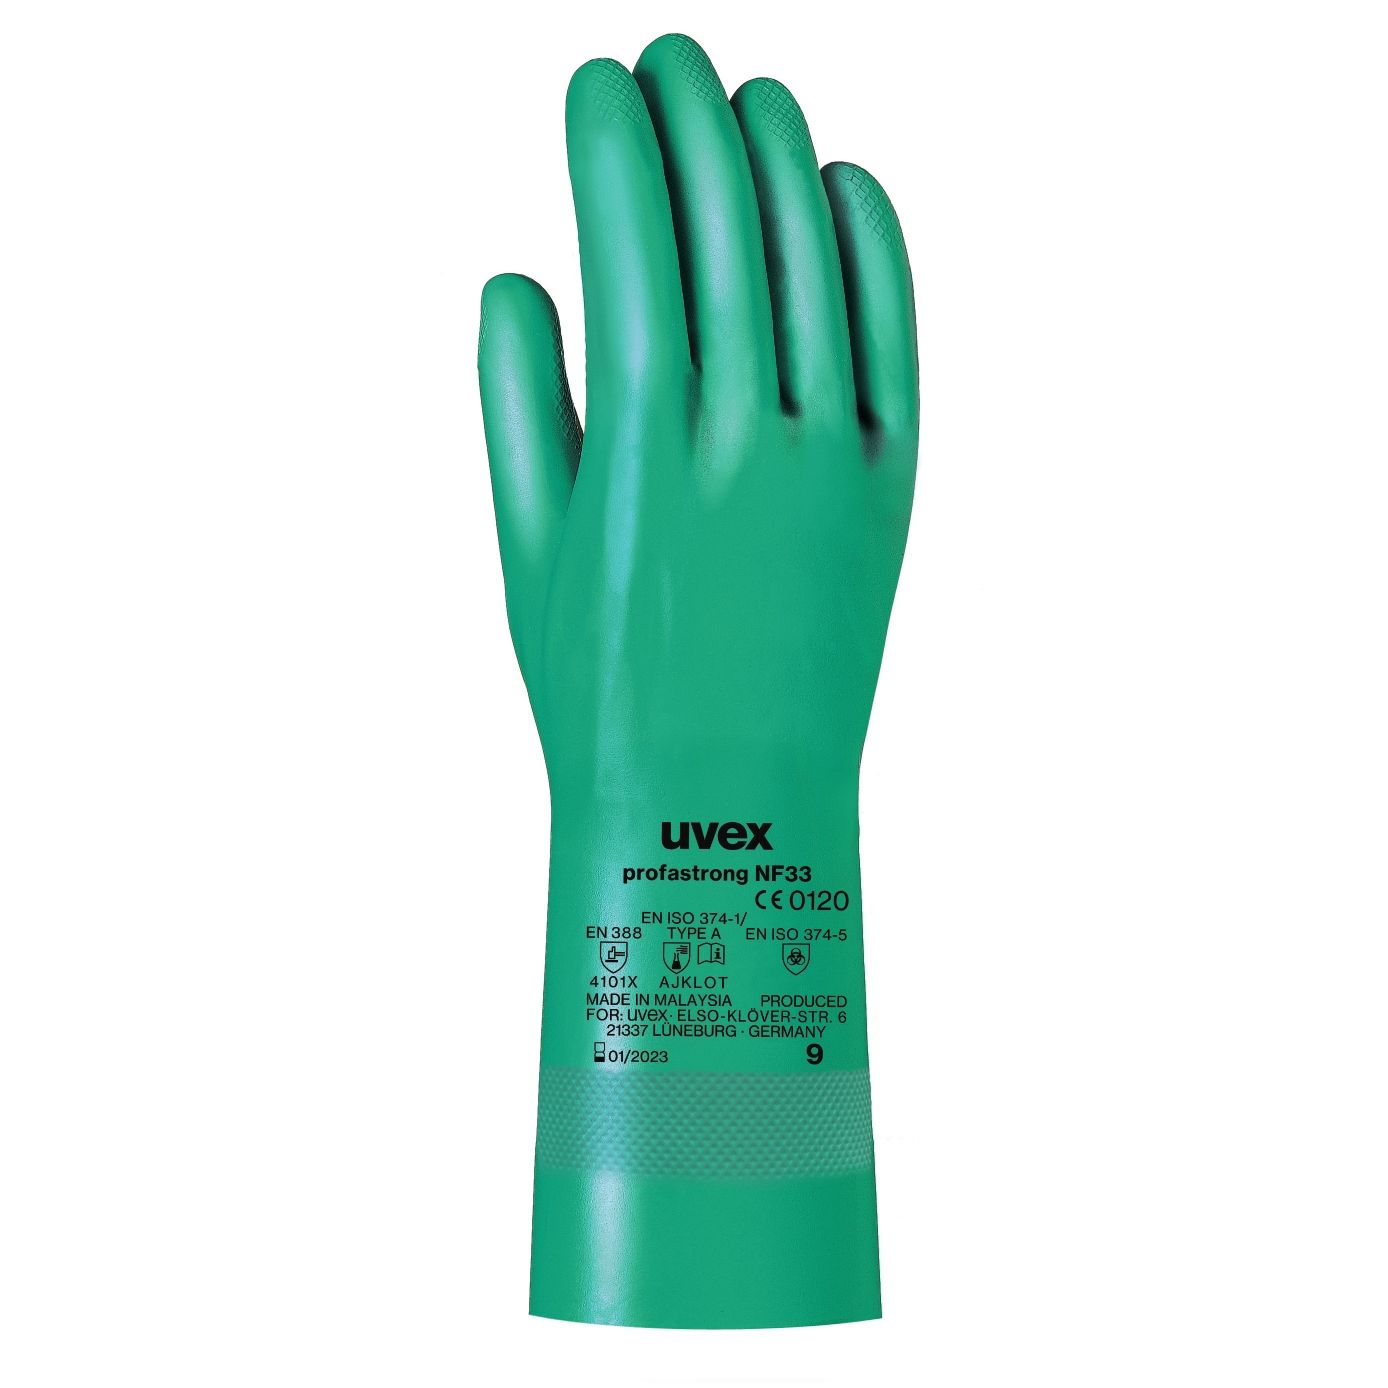 uvex profastrong NF33 chemical protection glove - X Large (10)